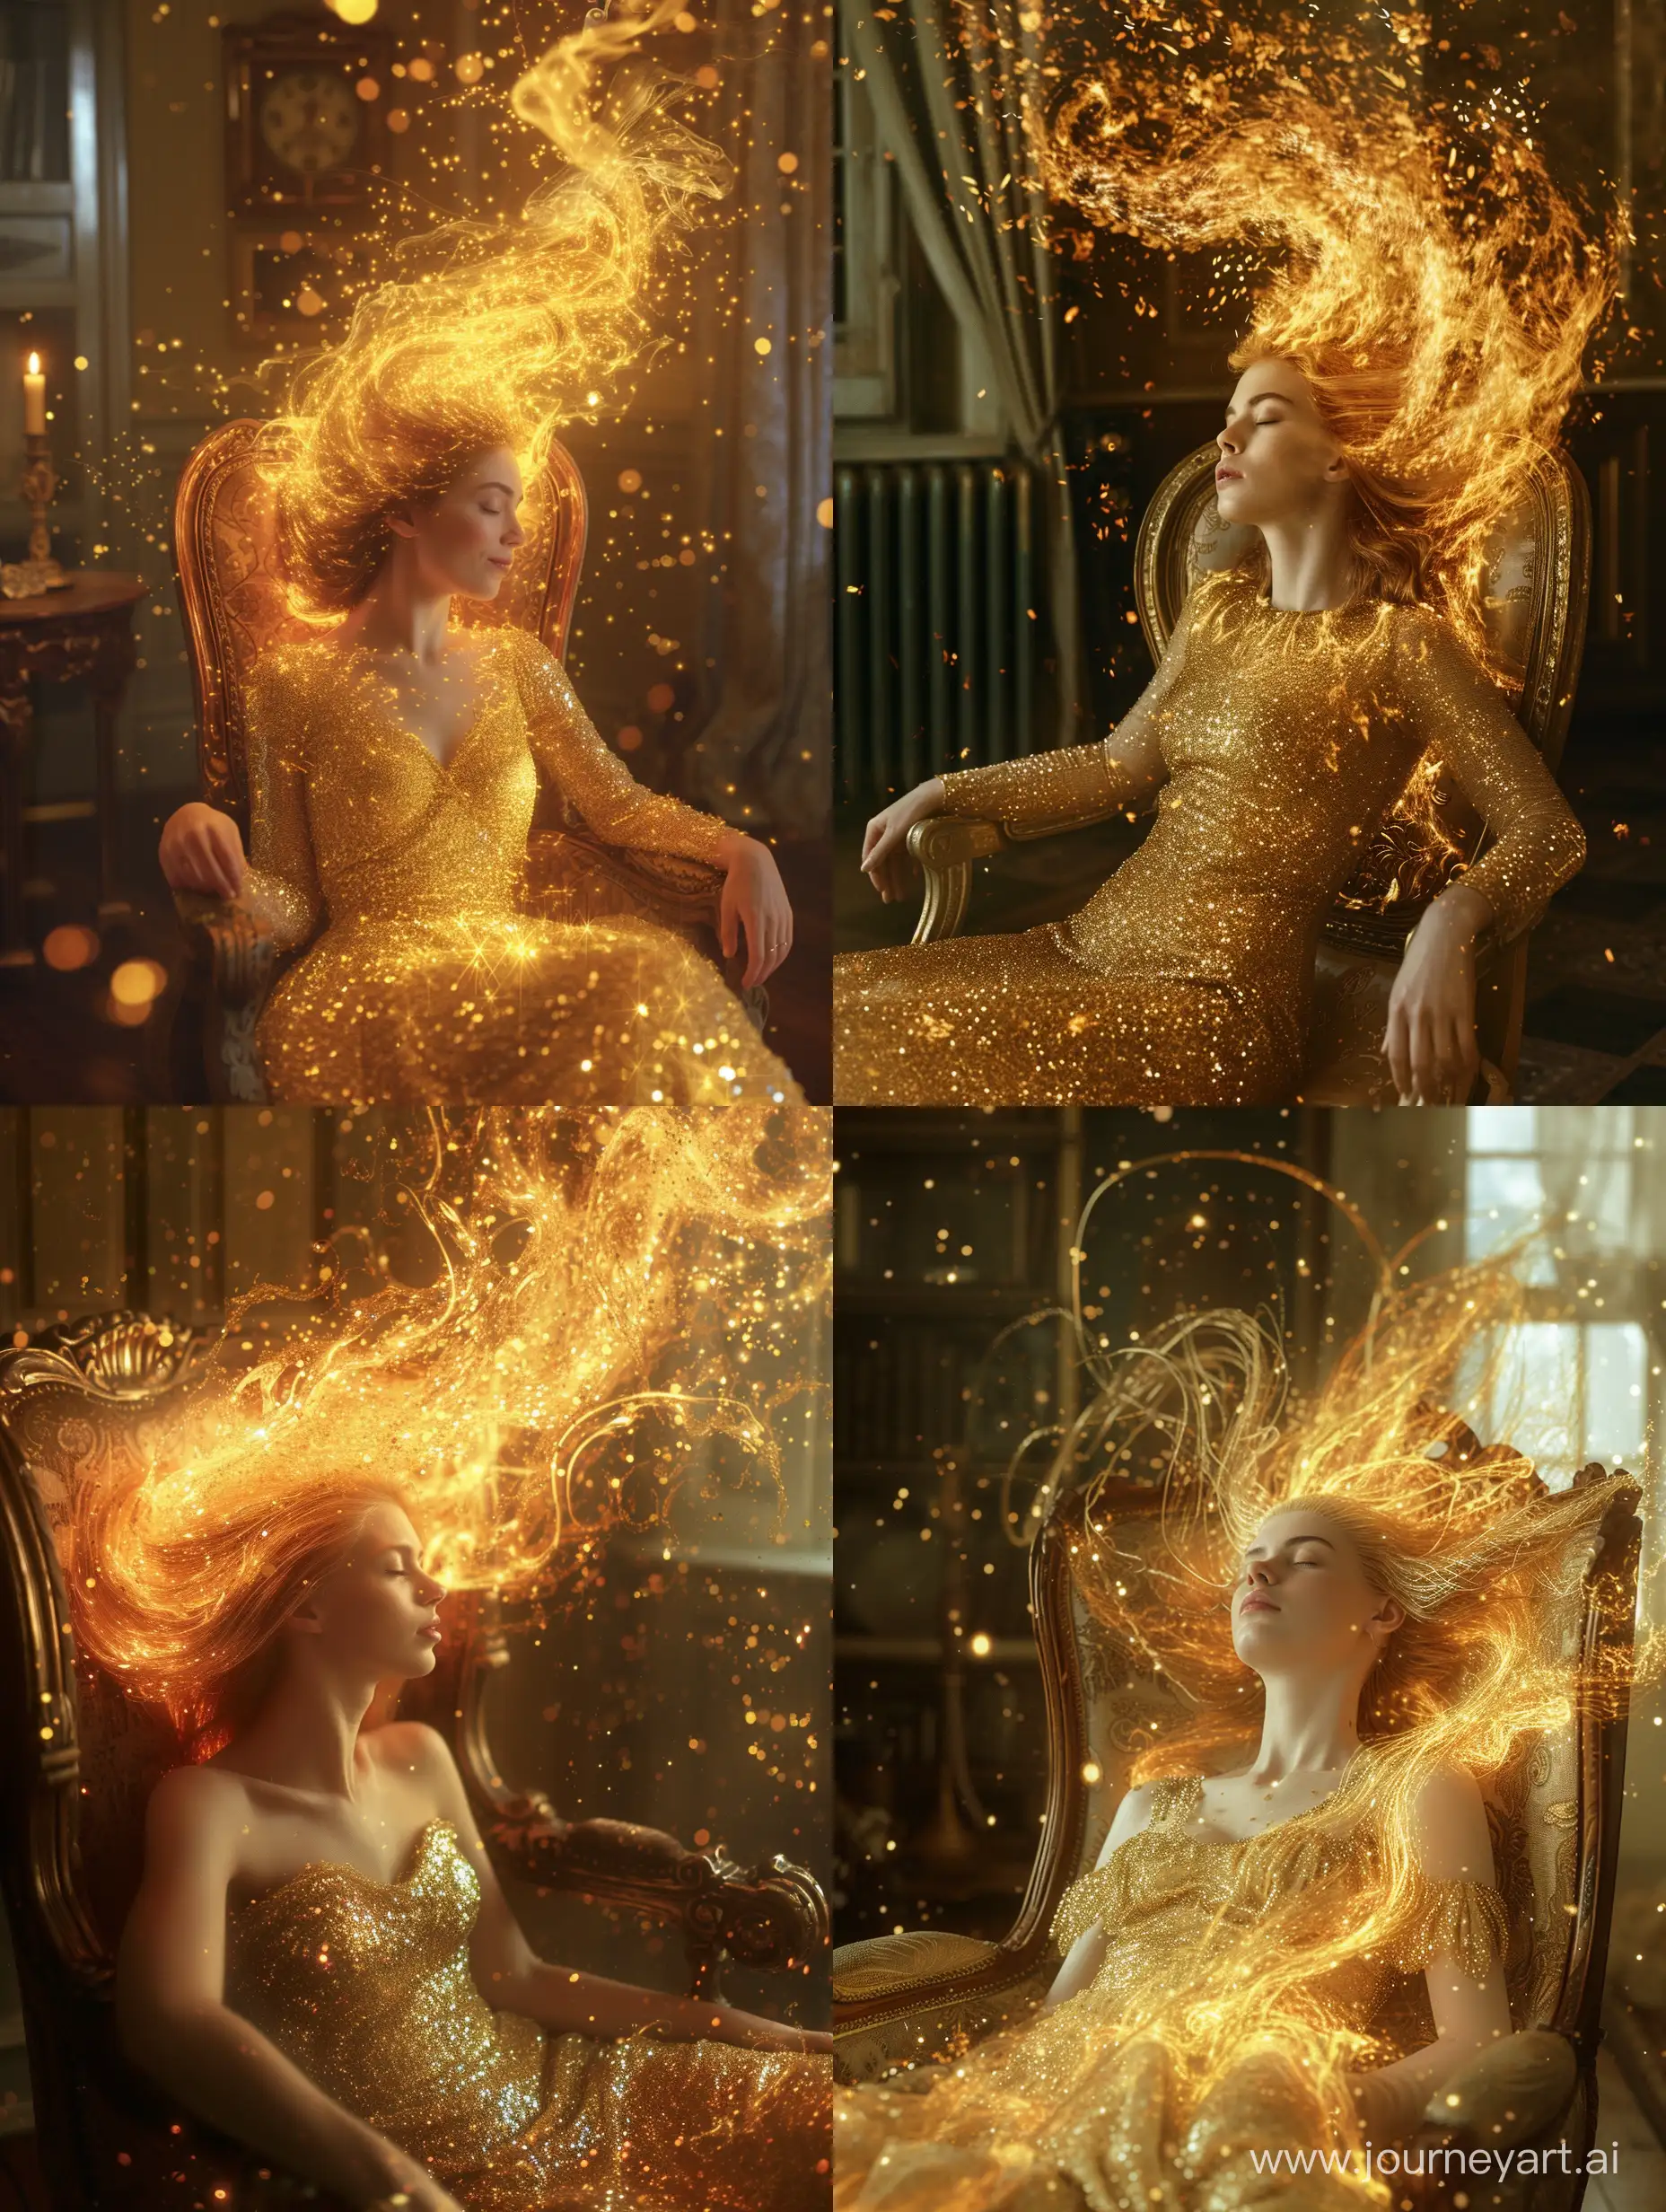 a woman who personifies the essence of fire. She gracefully reclines in an antique chair, her body is enveloped in swirling flames that do not burn, her hair, a shining golden mane, scatters around her head and shoulders, indistinguishable from the flames, a sparkling golden dress sparkling with countless sparkles, the room is dimly lit, her eyes are closed and her expression is peaceful faces